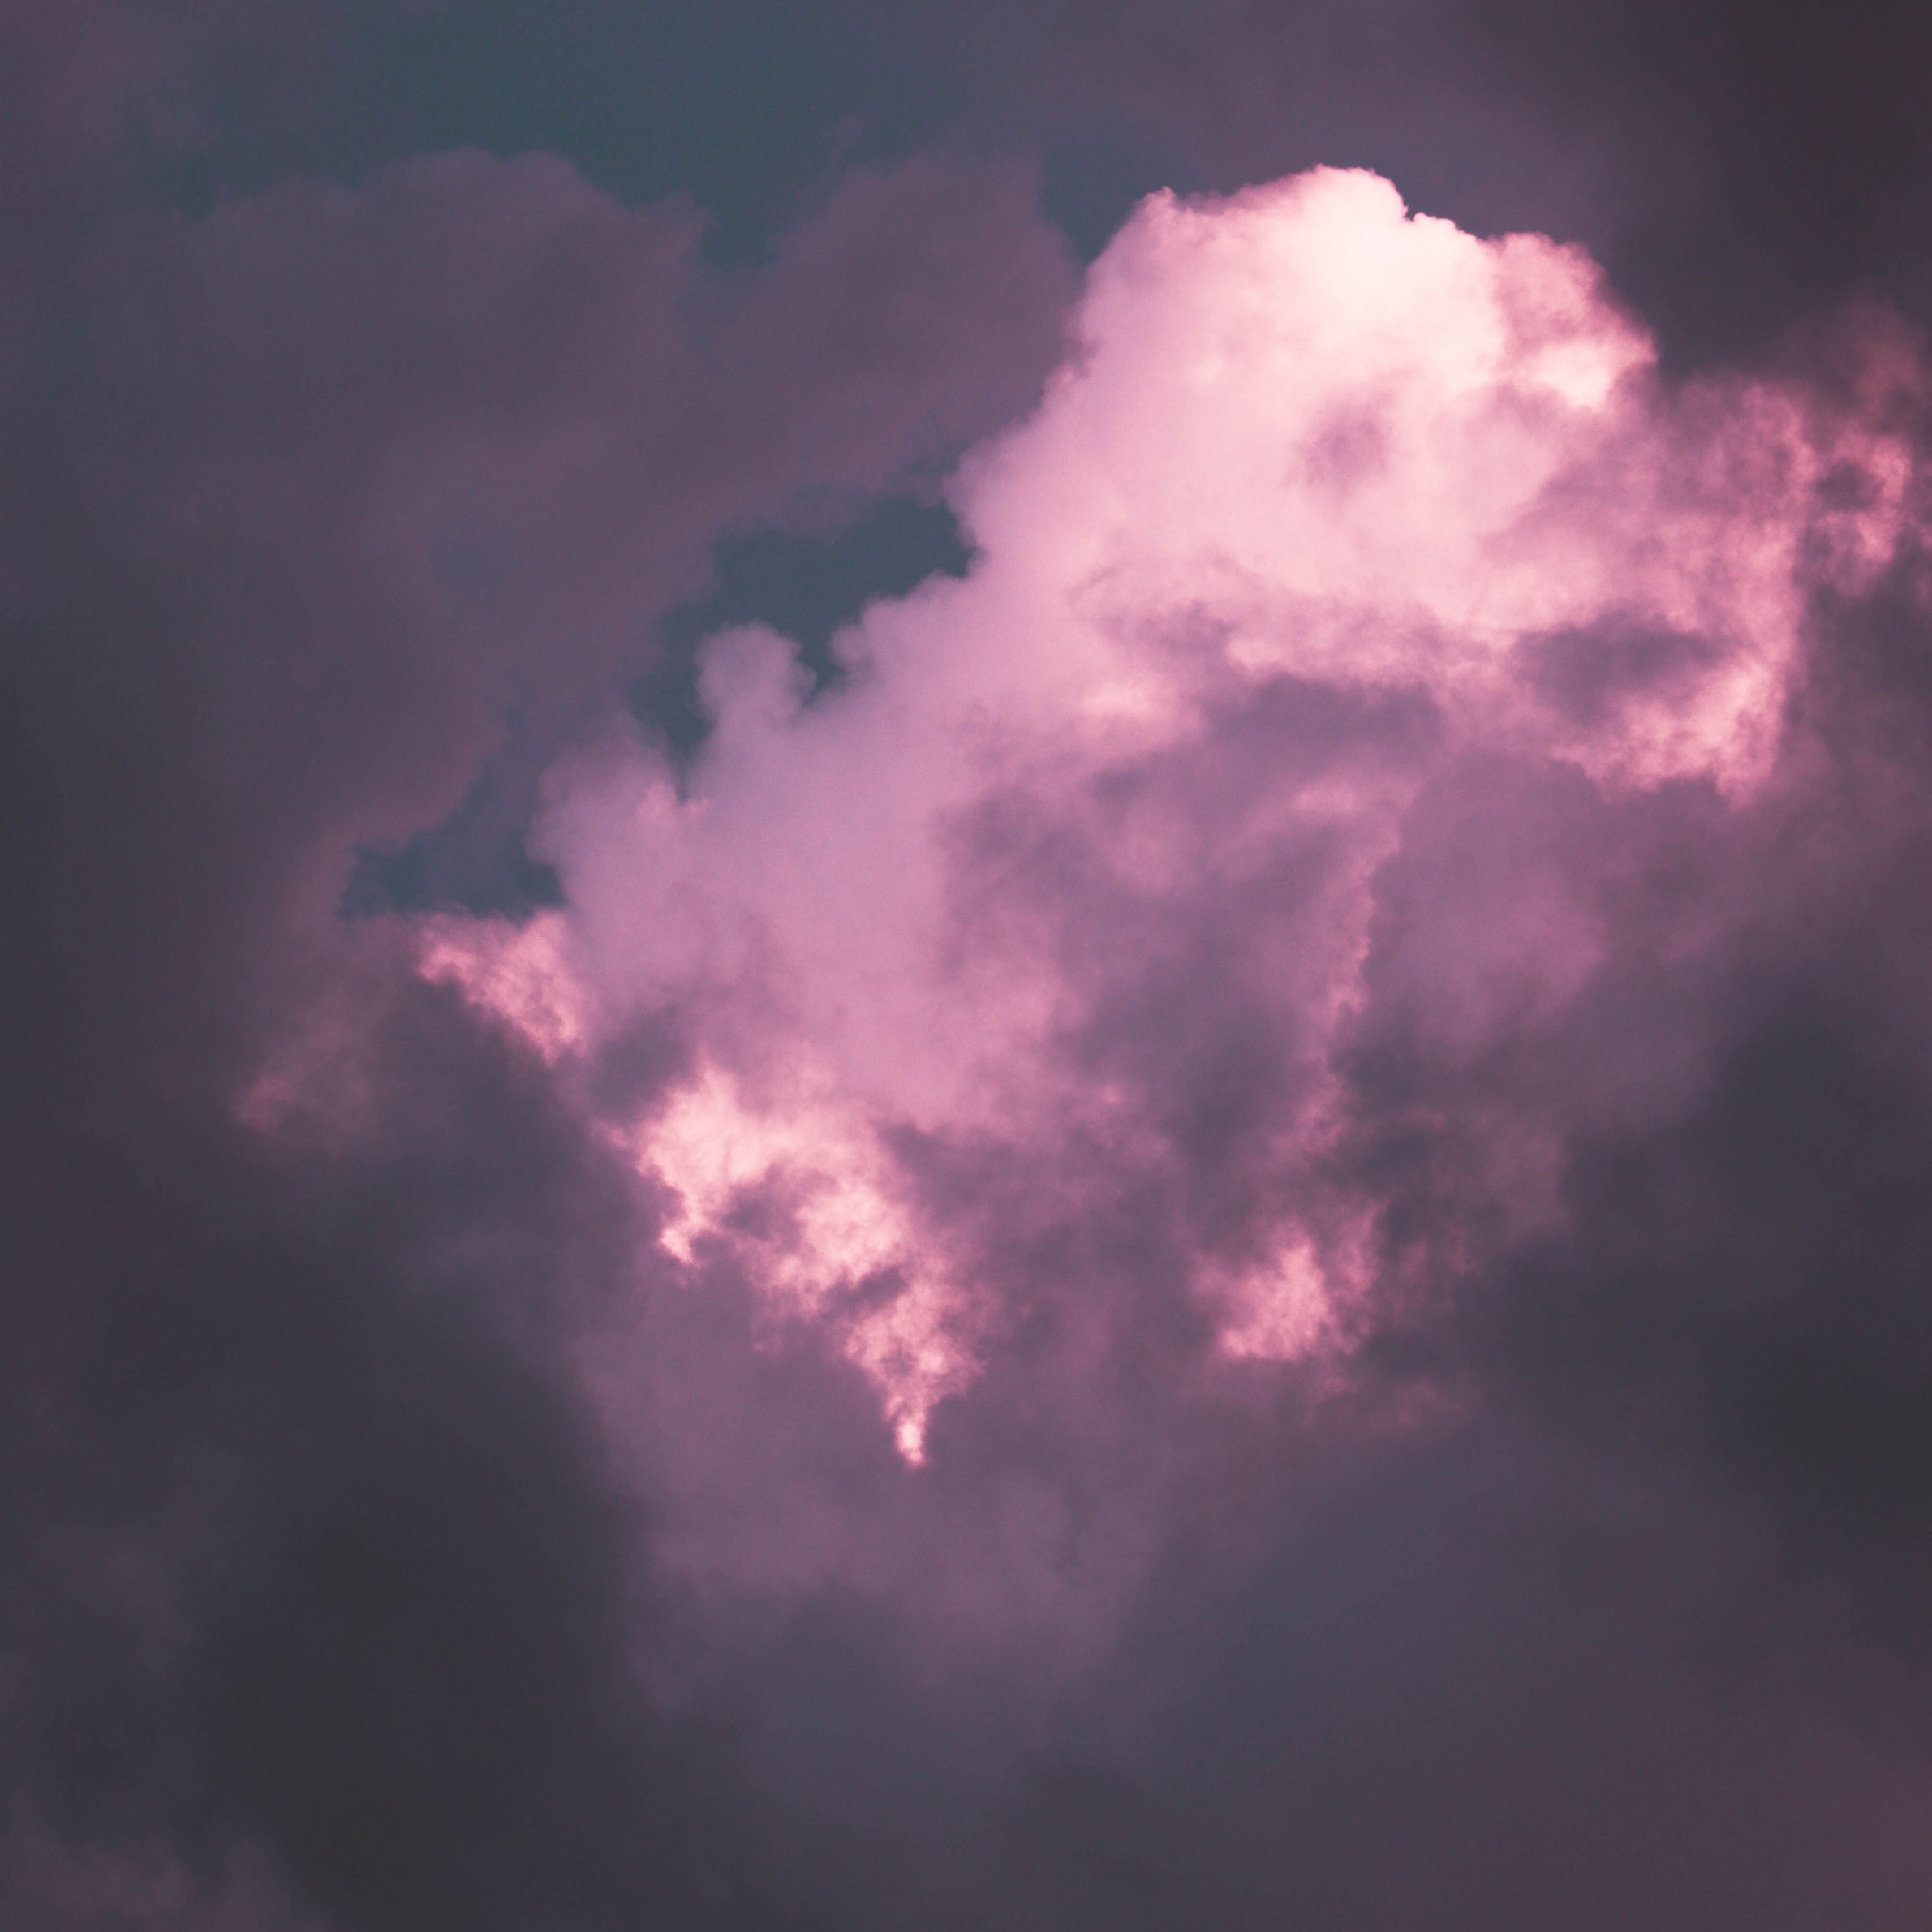 Download wallpaper 3415x3415 clouds, sky, purple, shade, atmosphere ipad pro 12.9 retina for parallax HD background